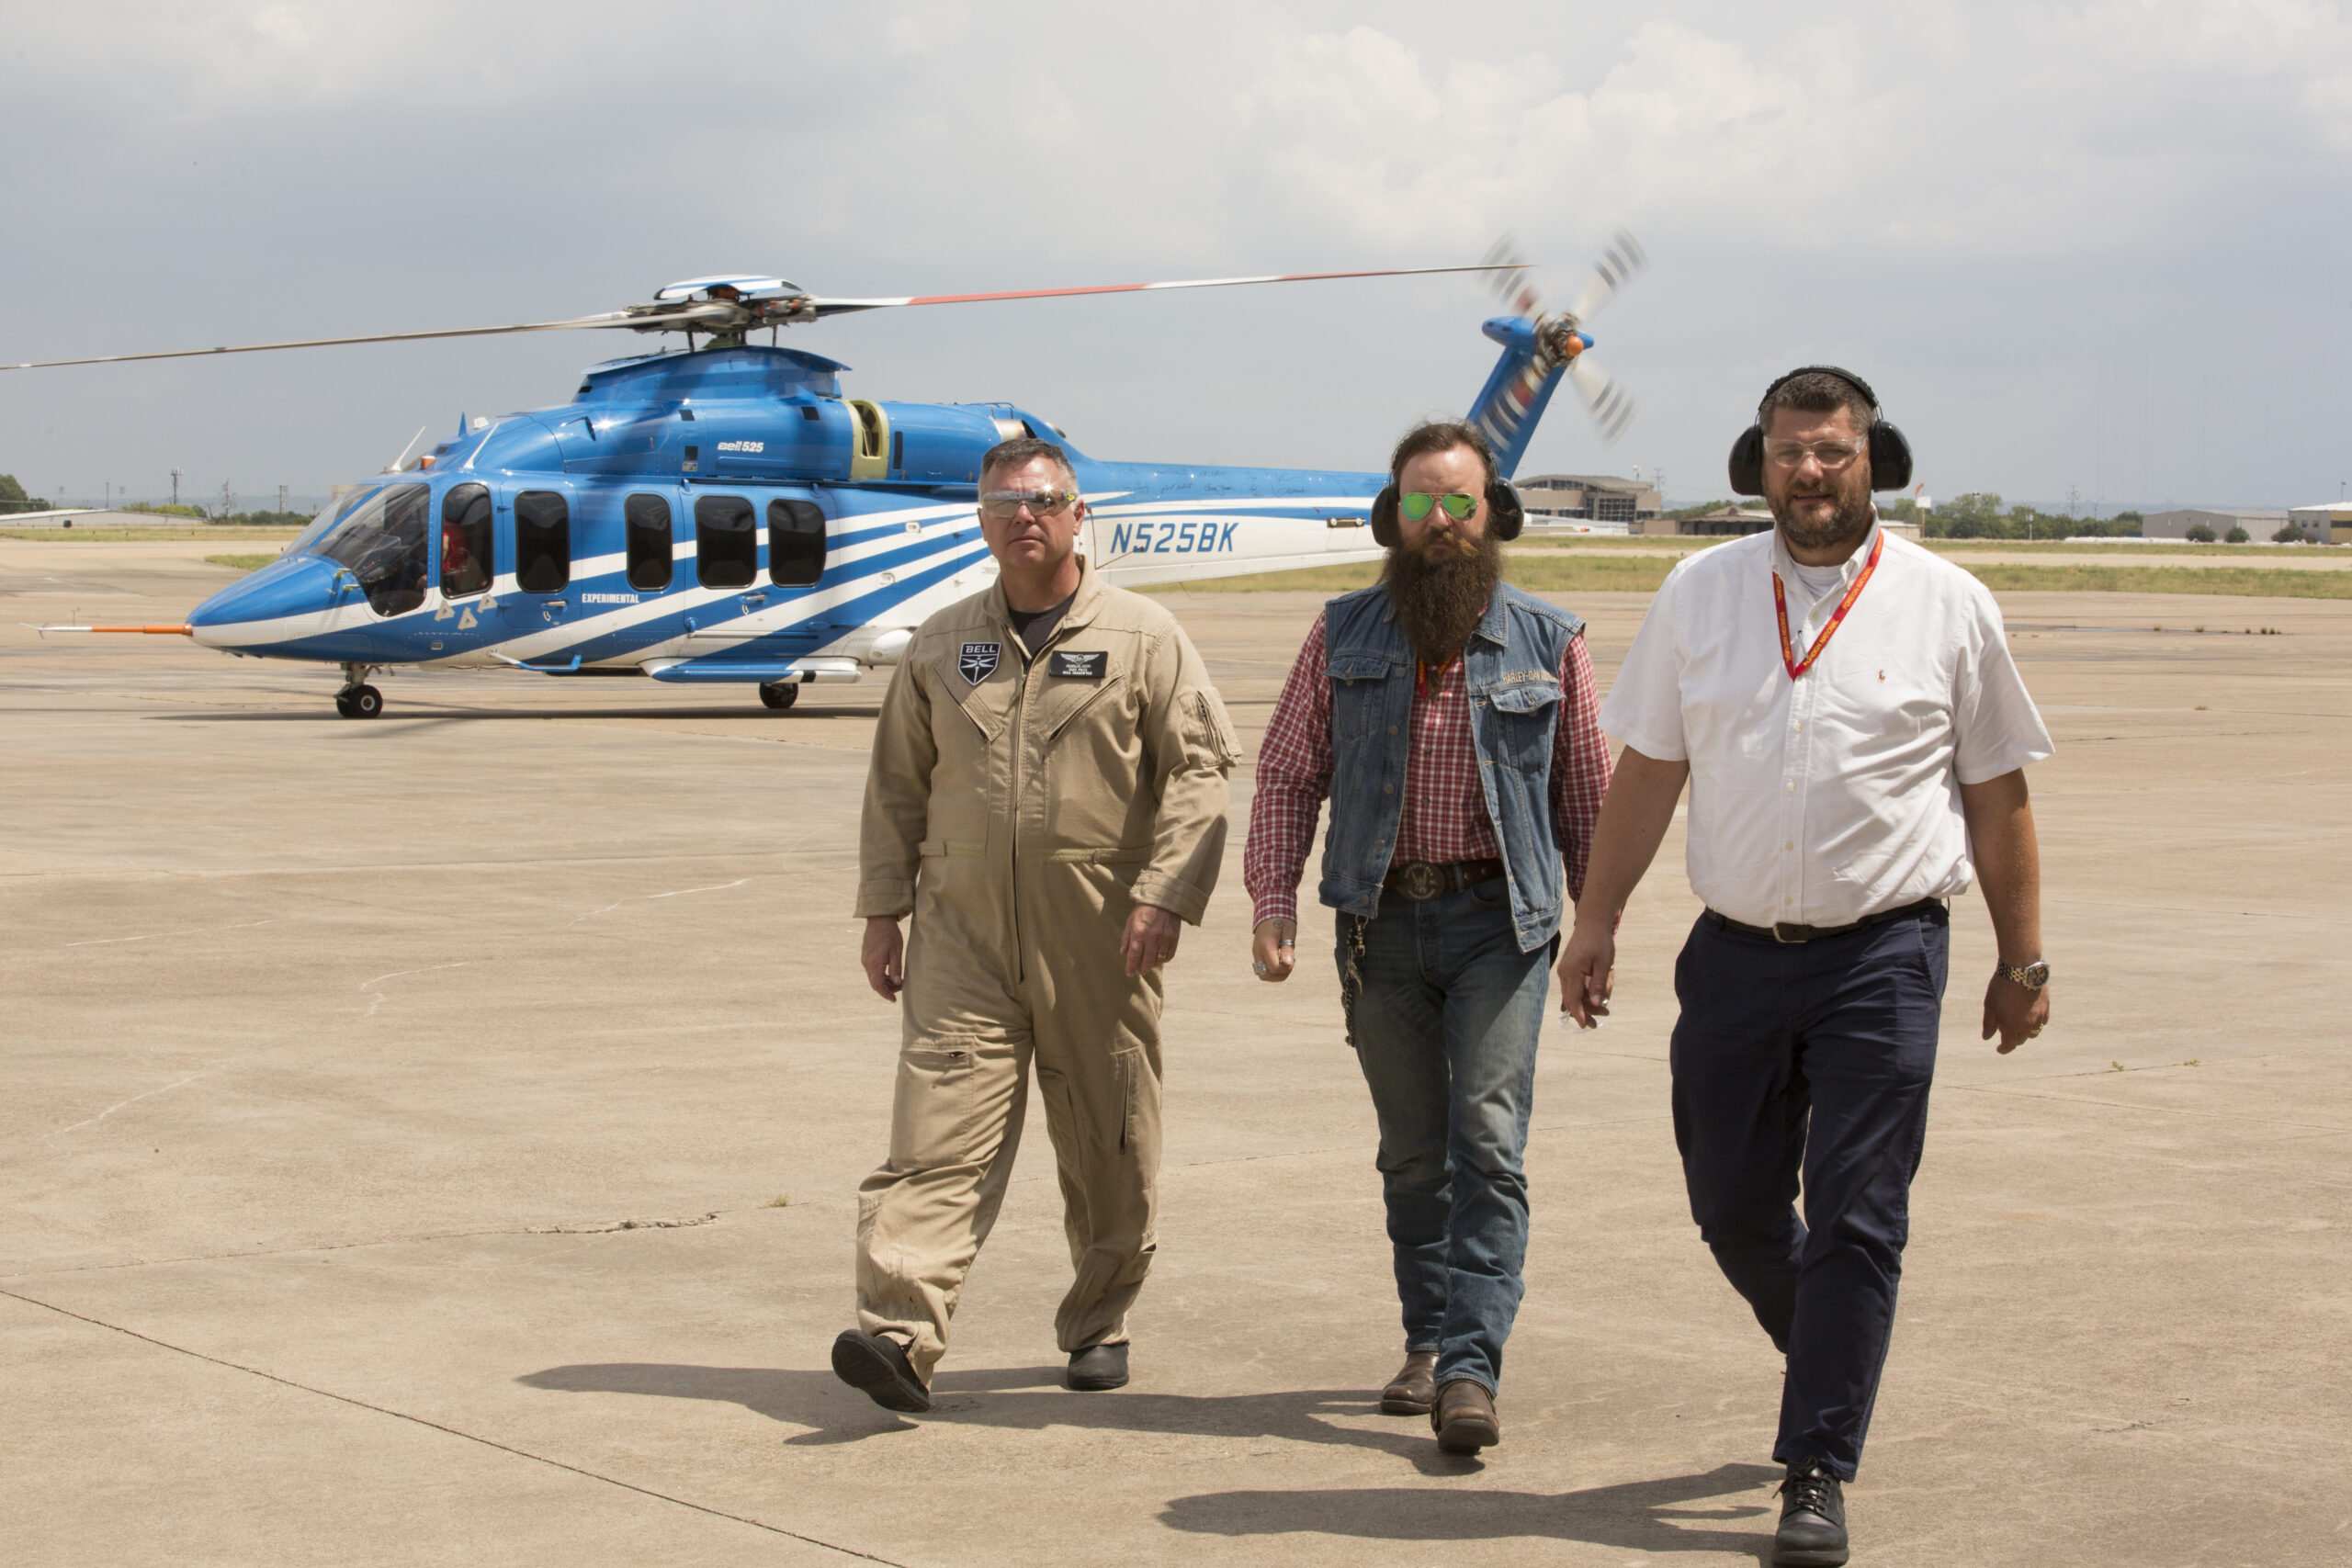 The head of the Helicopter Committee Henrik Fjeldsbø (in the middle) and Torstein Sandven (to the right) participated in Bell 525’s first flight during their visit to Texas. Photo: Bell